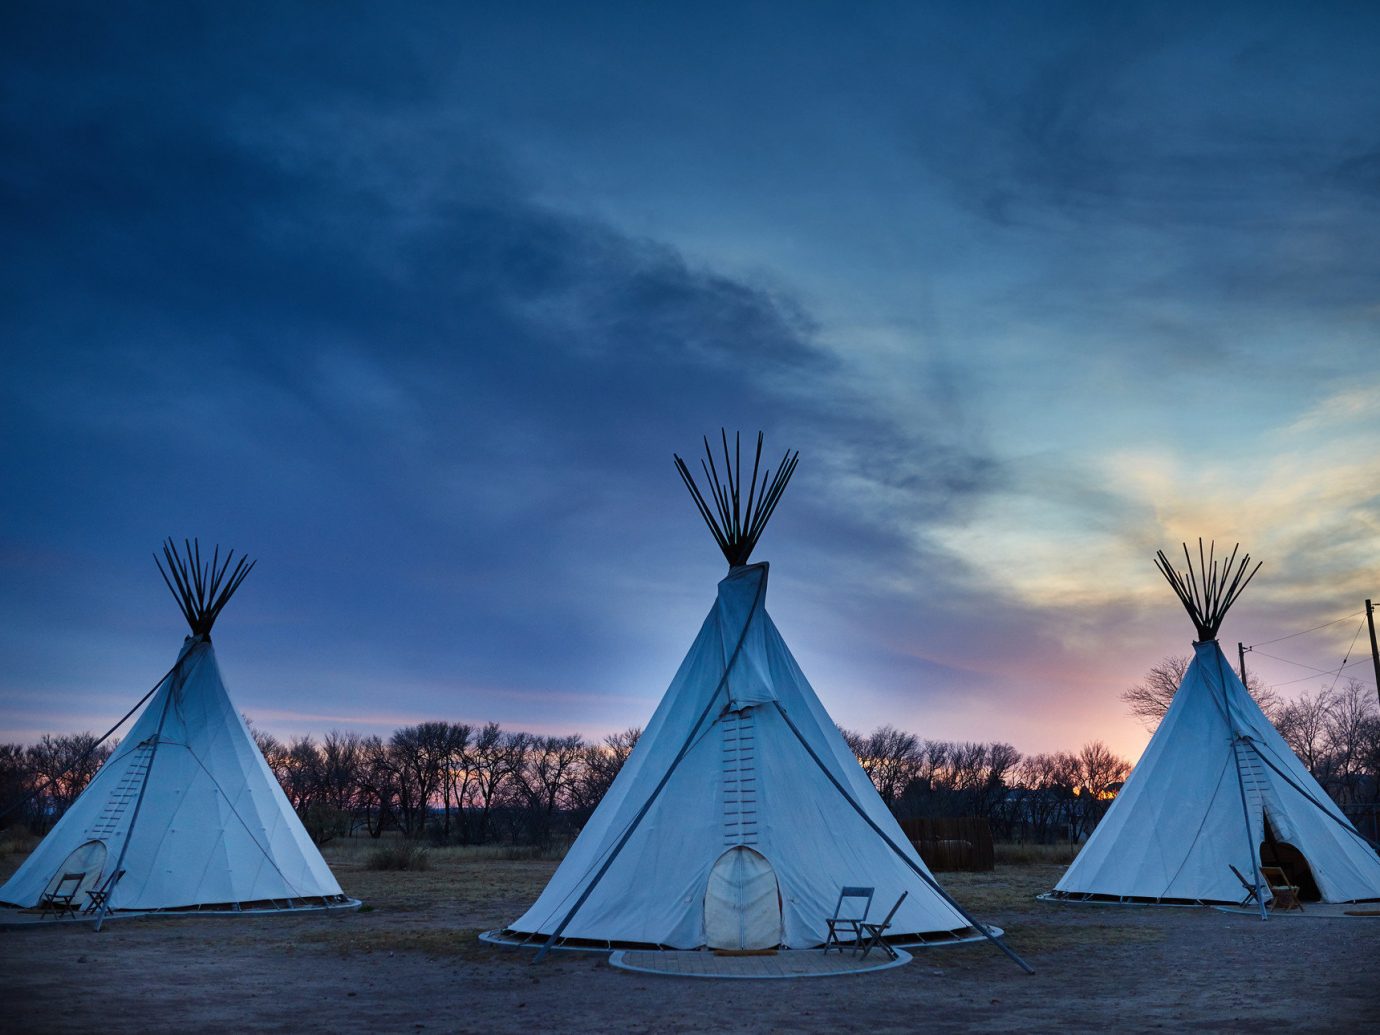 artistic artsy calm dawn dusk Exterior Glamping Hip Hotels isolation Luxury Travel Outdoors + Adventure quirky remote serene Solo Travel teepee trendy Trip Ideas Weekend Getaways tepee sky outdoor building water blue cloud light Sea horizon Winter night evening morning Ocean sunlight ice reflection Sunset lit wind several